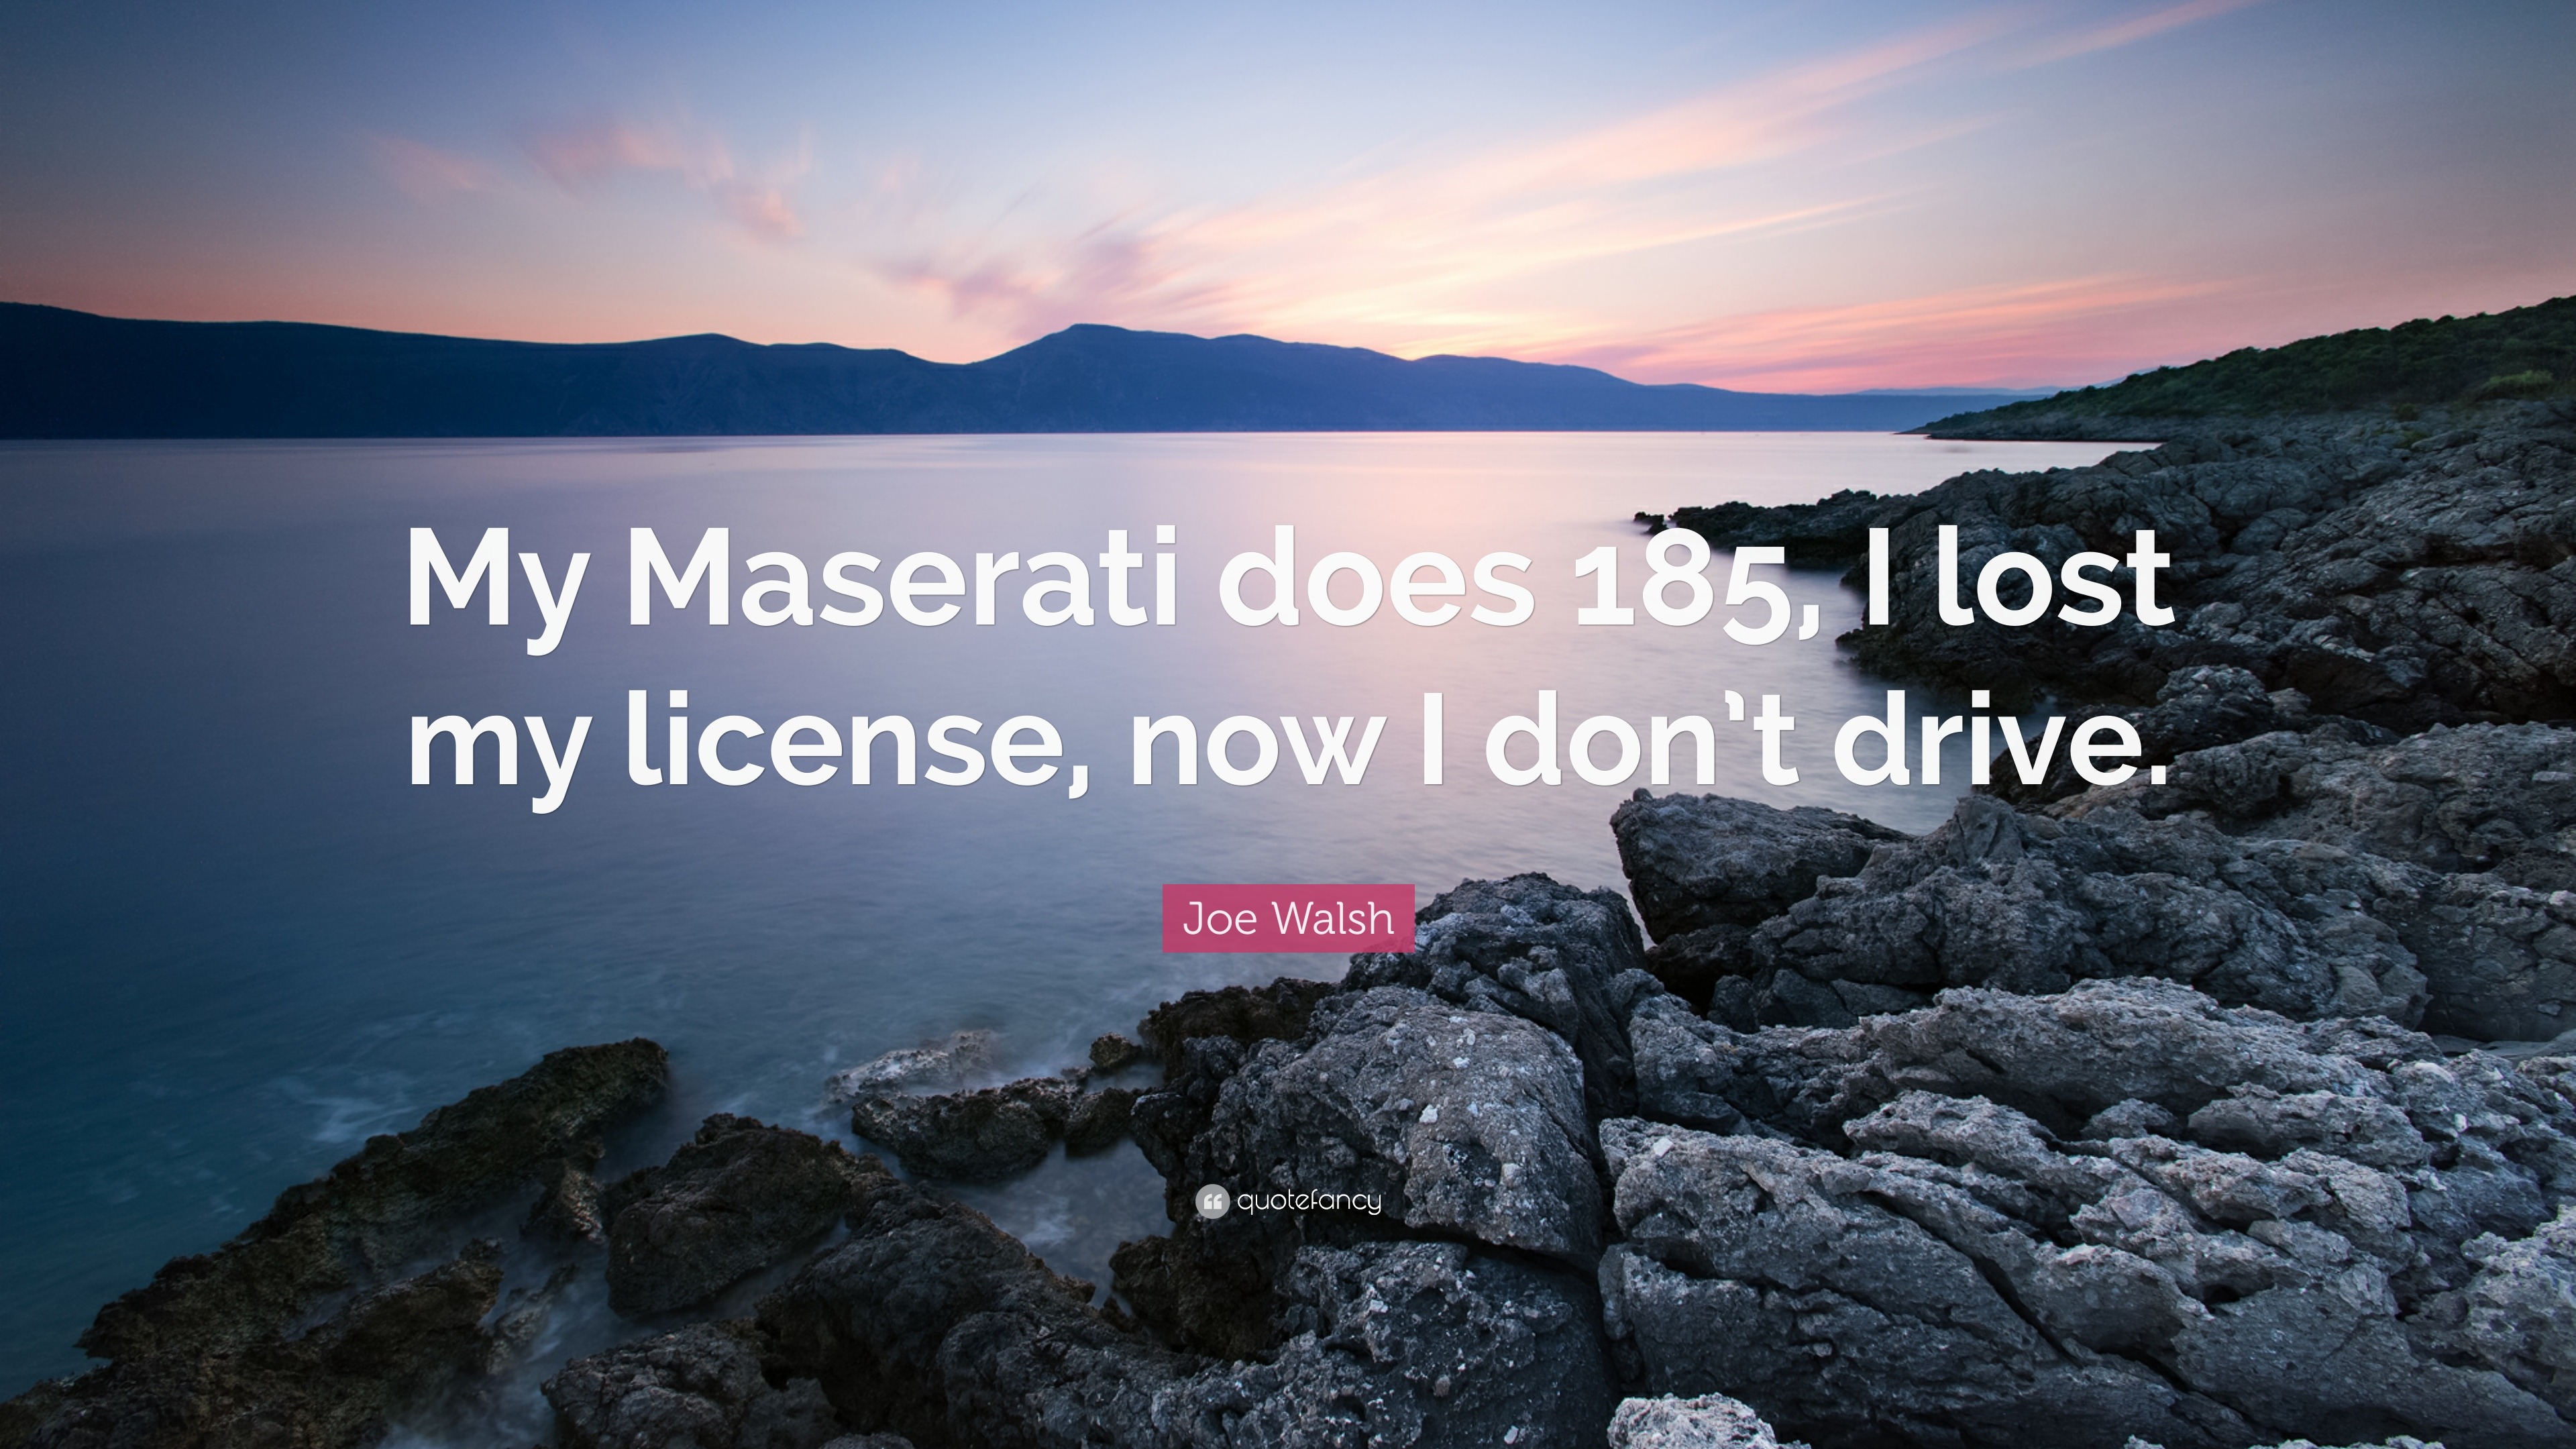 Joe Walsh Quote: “My Maserati does 185, I lost my license, now I don't  drive.”